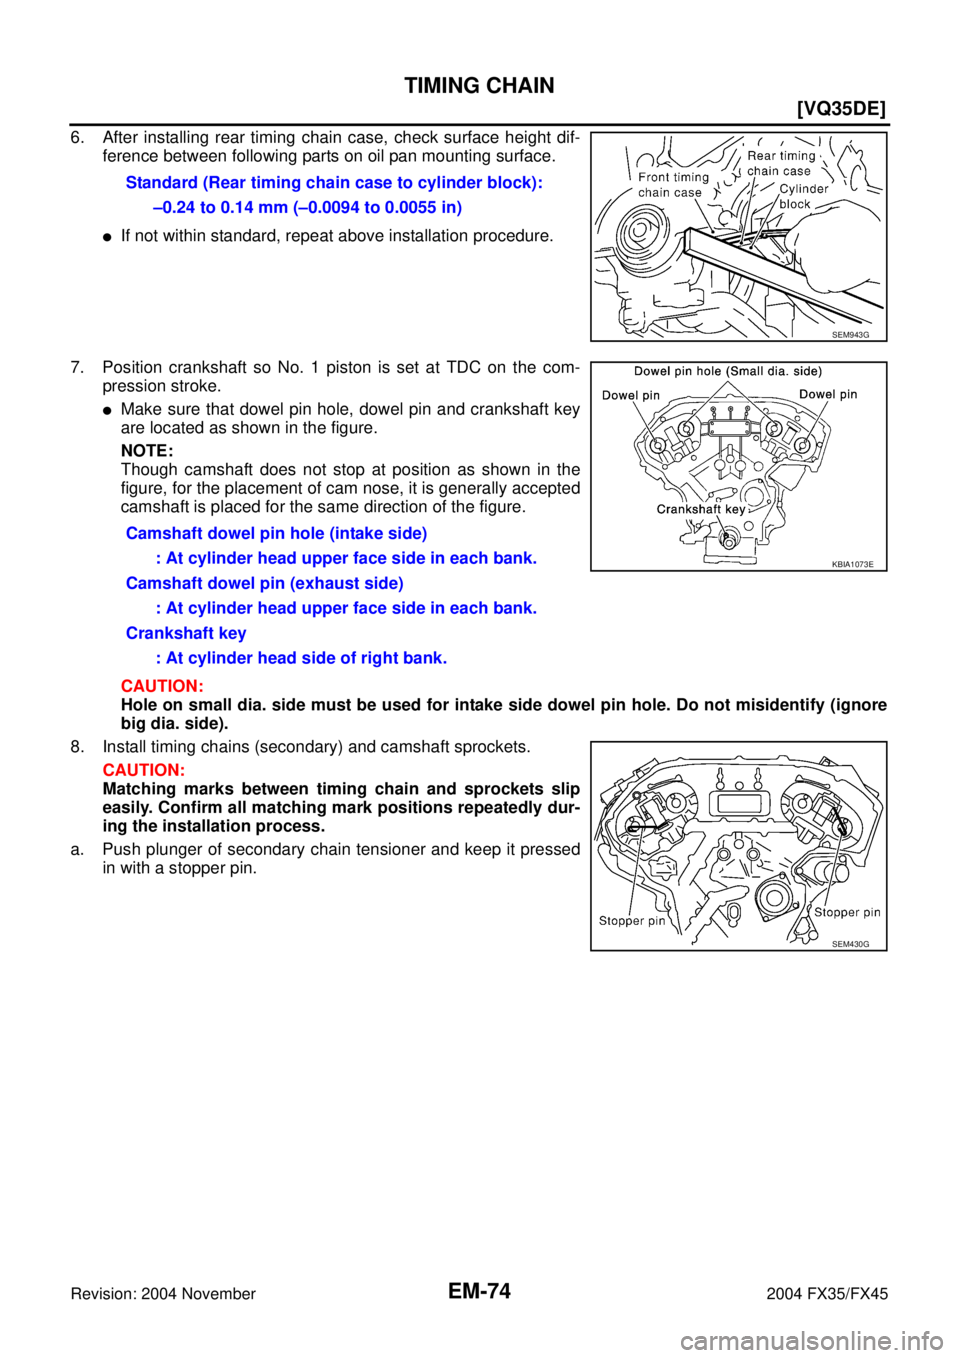 INFINITI FX35 2004  Service Manual EM-74
[VQ35DE]
TIMING CHAIN
Revision: 2004 November 2004 FX35/FX45
6. After installing rear timing chain case, check surface height dif-
ference between following parts on oil pan mounting surface.
I